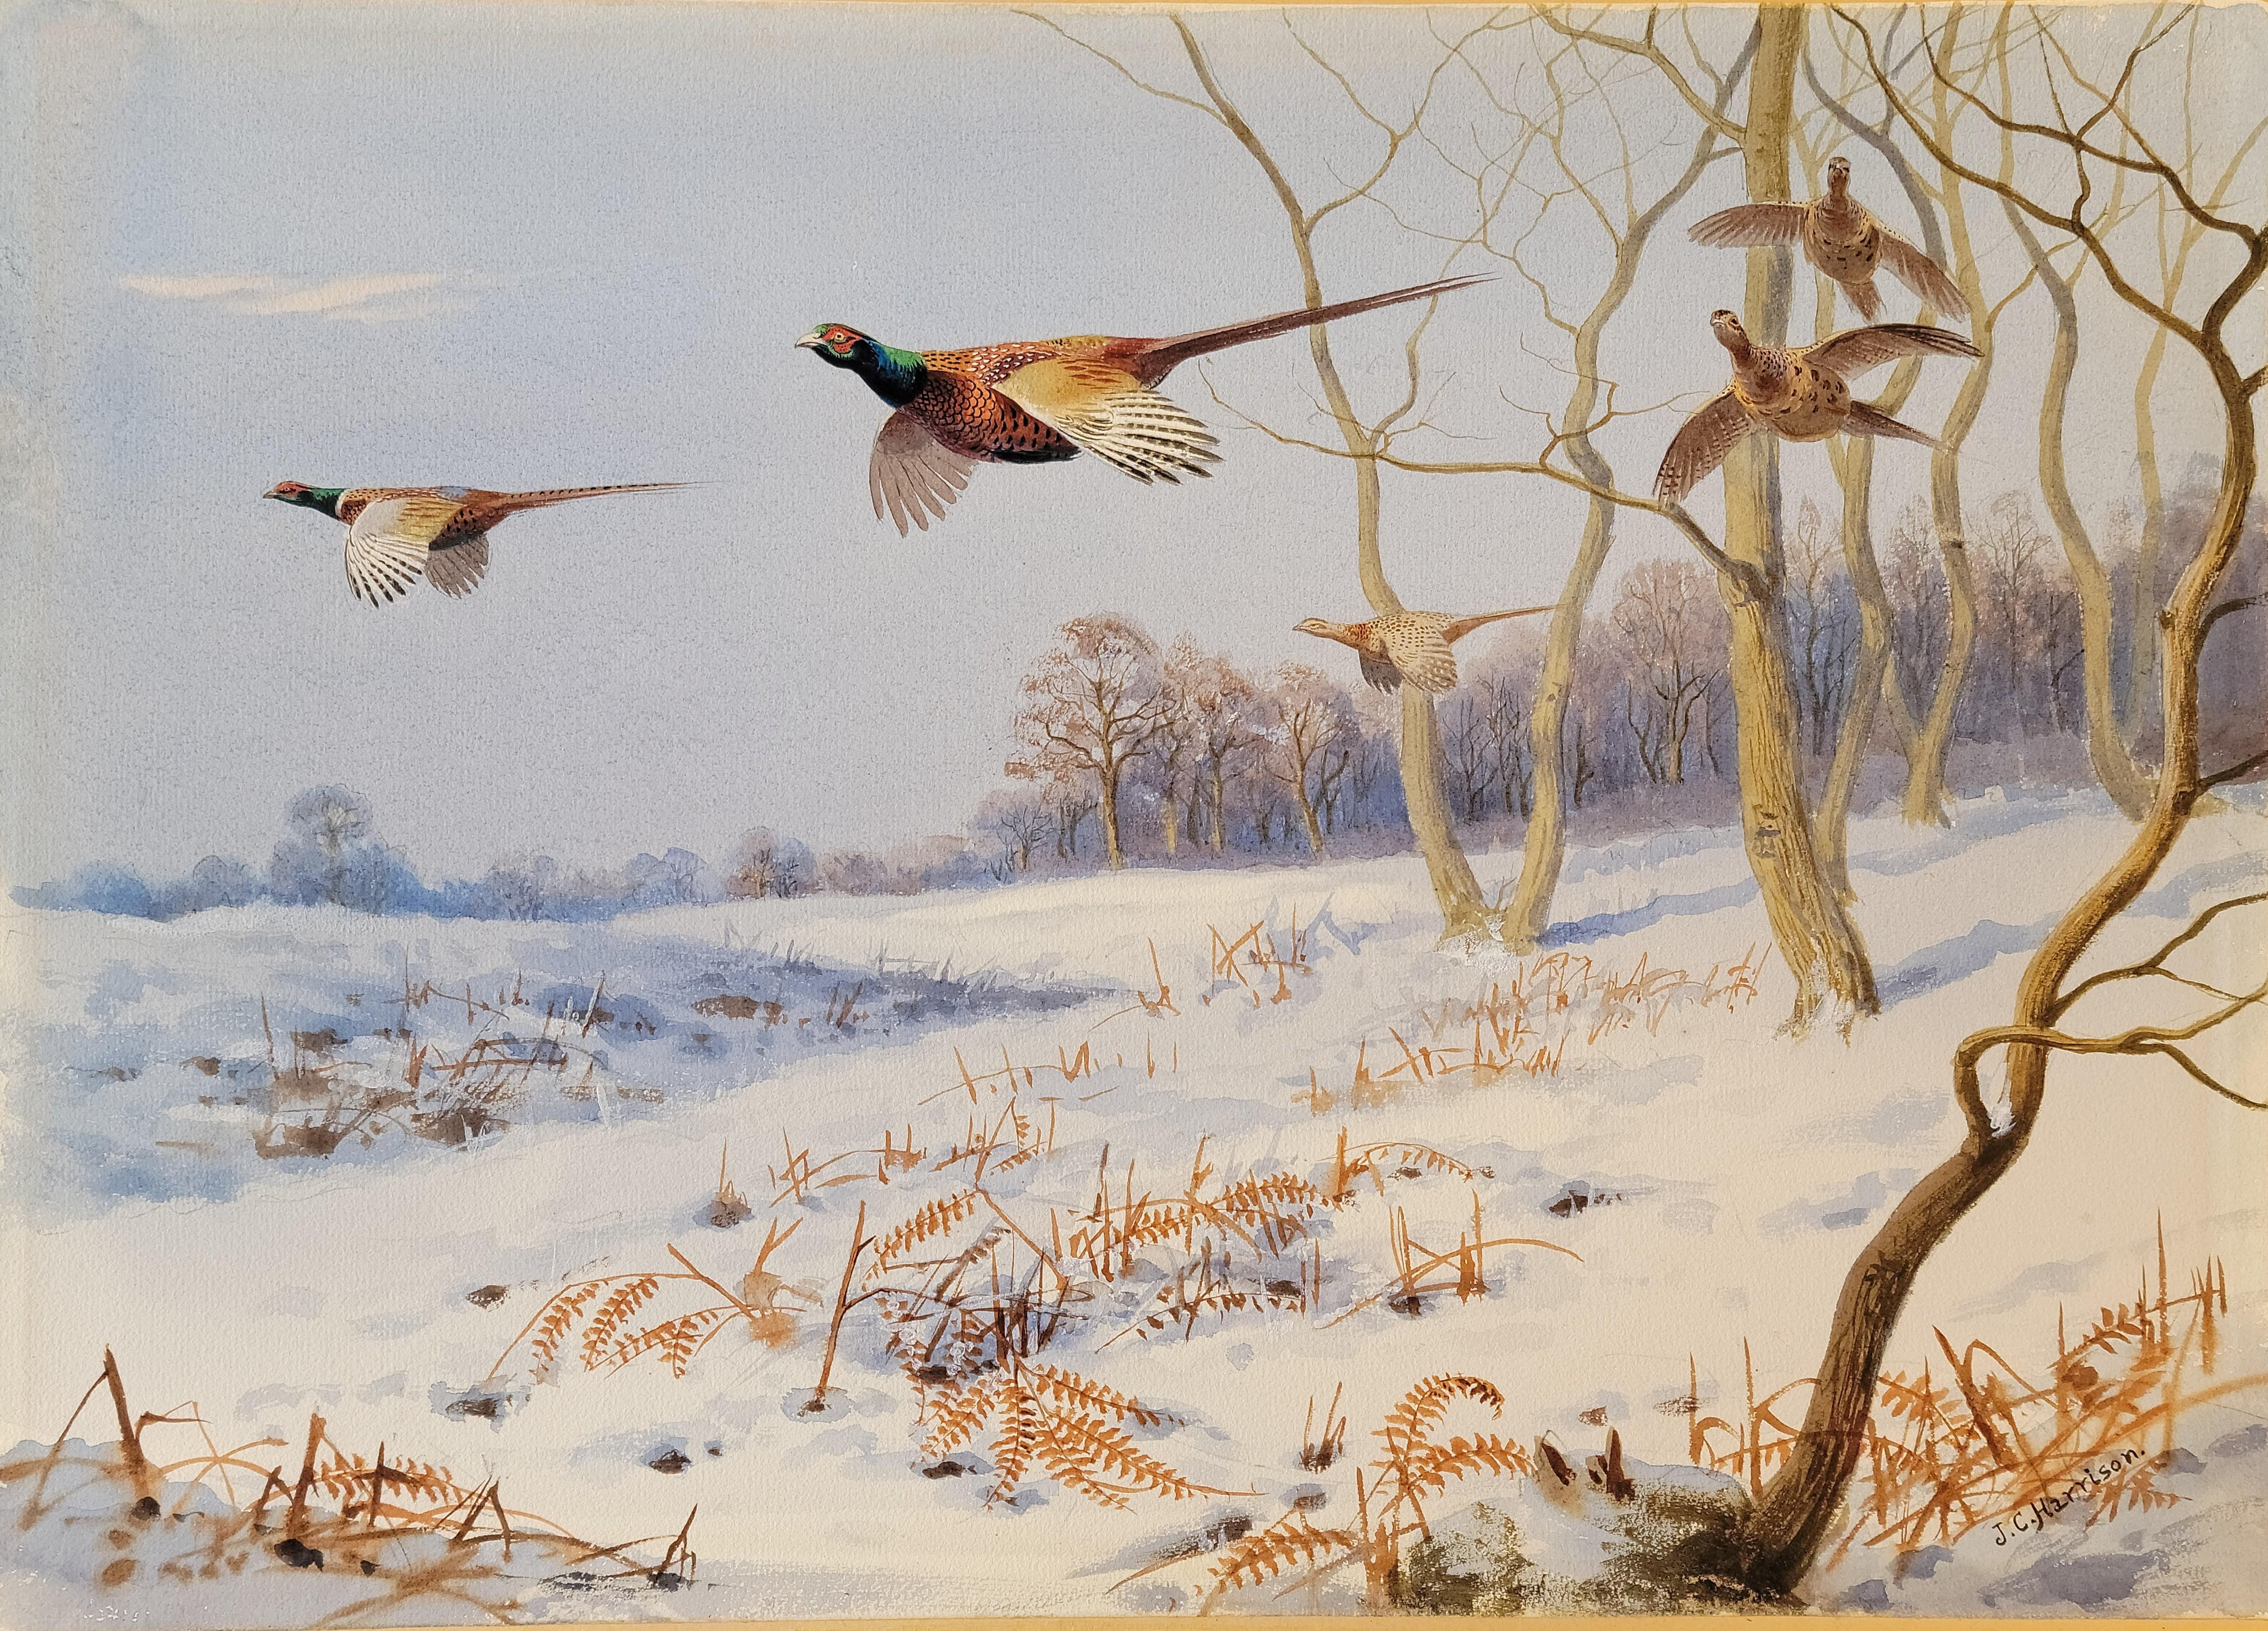 John Cyril Harrison (British, 1898 - 1985)

Signed: J.C. Harrison. (Lower, Right)

" Winter Pheasants ", circa 1925-1930
(Titled in pencil on verso by the artist)

Watercolor laid on board by the artist.

Sheet size: 13 3/8" x 19"

Board size: 13